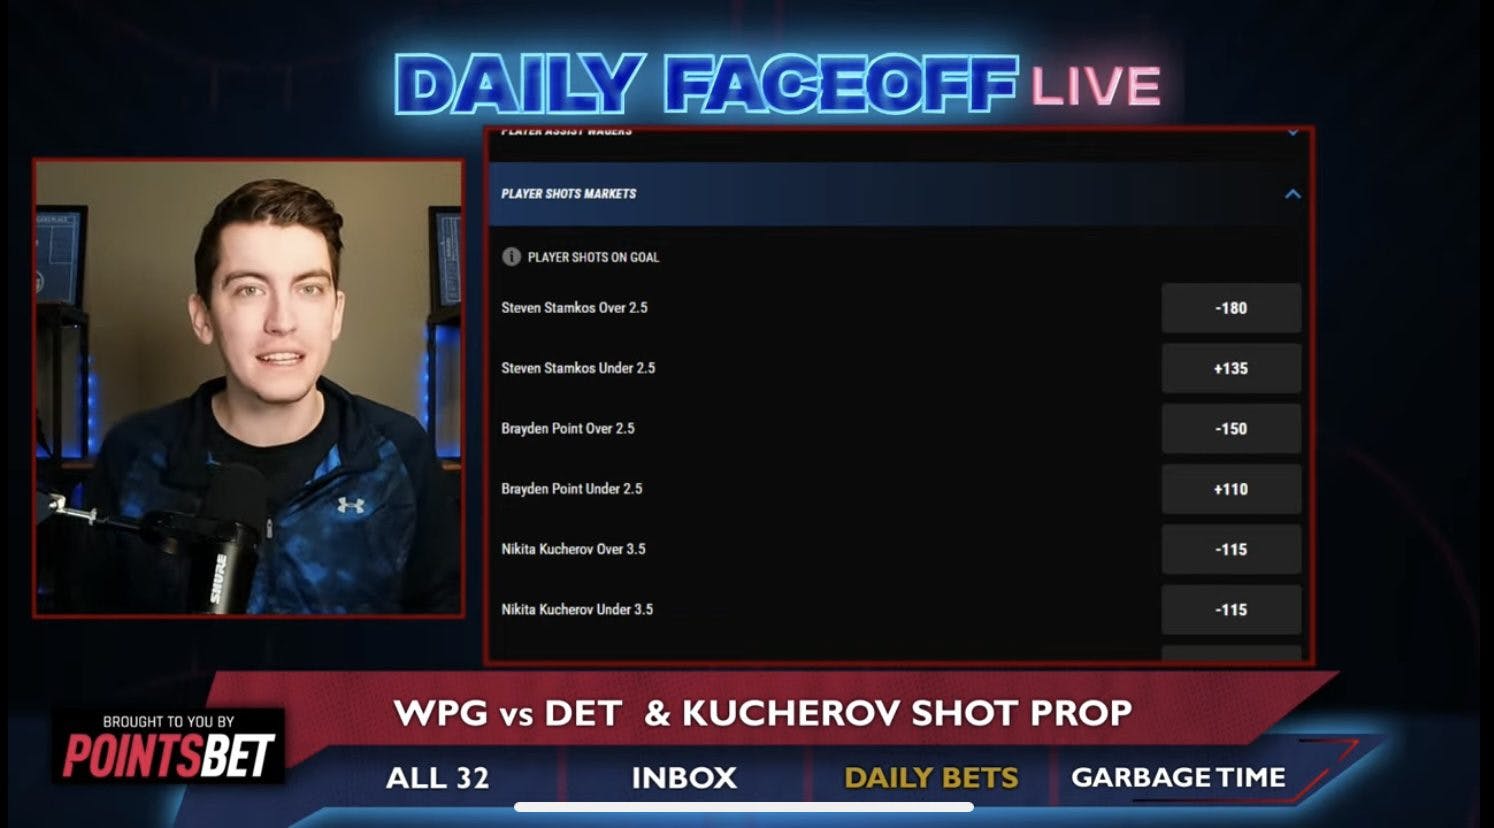 Daily Faceoff Live: Black Friday shopping for Western Conference